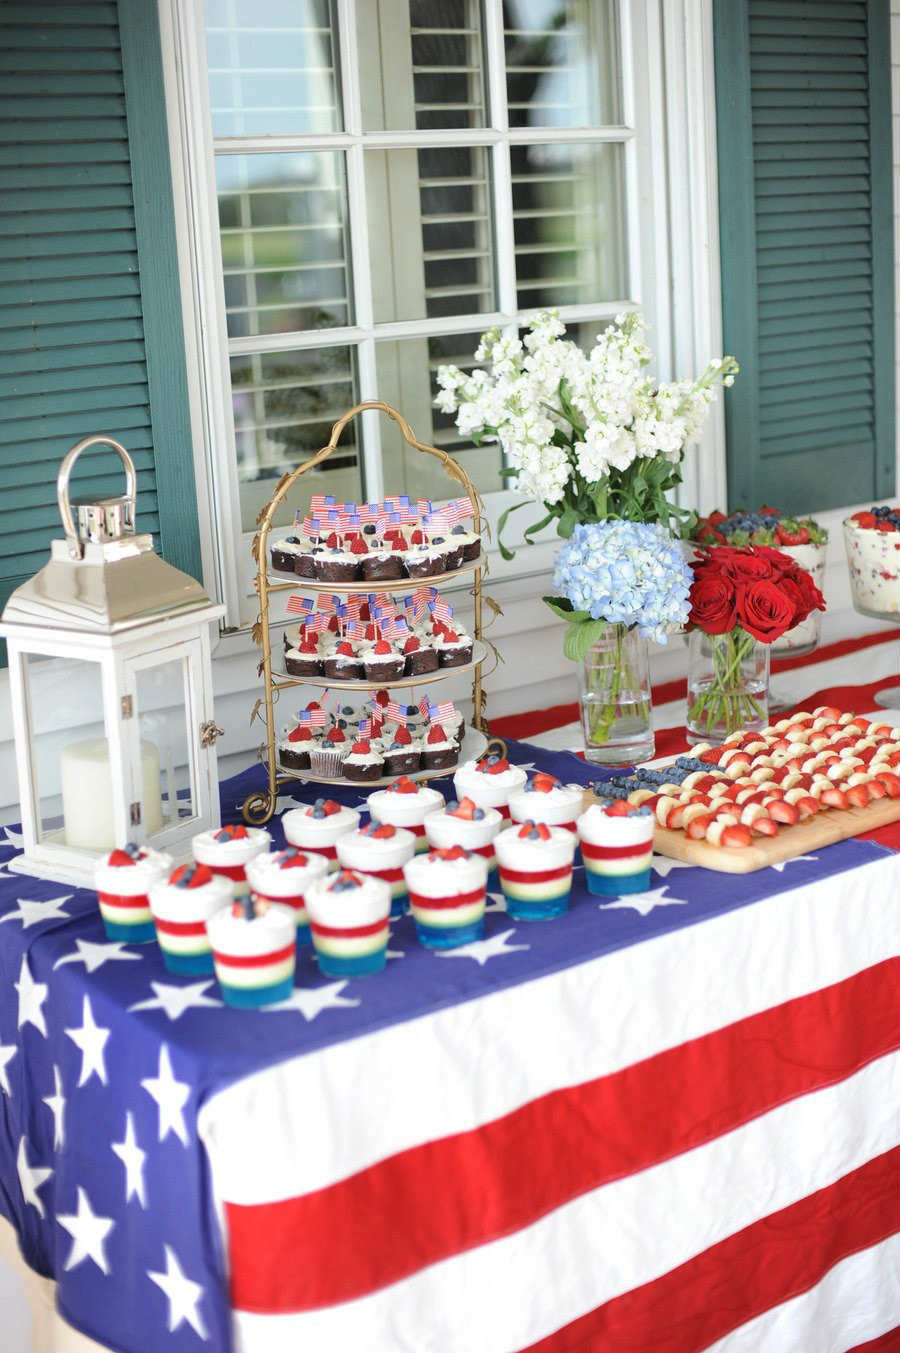 4th Of July Decorating Ideas
 10 Fourth of July Decoration Ideas Tinyme Blog